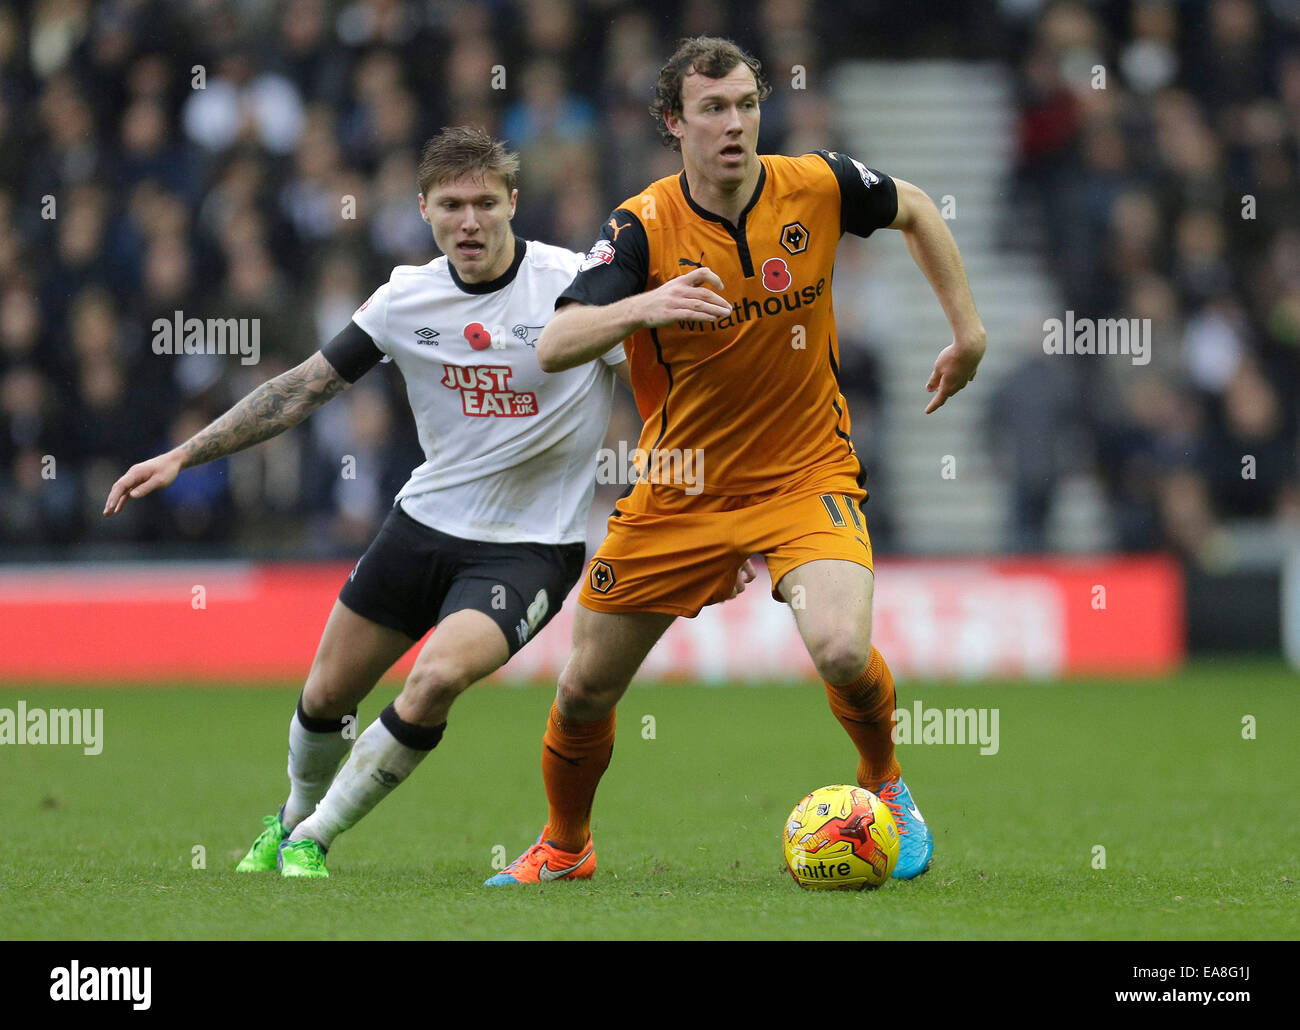 Derby, UK. 8th Nov, 2014. Kevin McDonald of Wolves competes with Jeff Hendrick of Derby - Football - Sky Bet Championship - Derby County vs Wolverhampton Wanderers - iPro Stadium Derby - Season 2014/15 - 8th November 2014 - Photo Malcolm Couzens/Sportimage. Credit:  csm/Alamy Live News Stock Photo